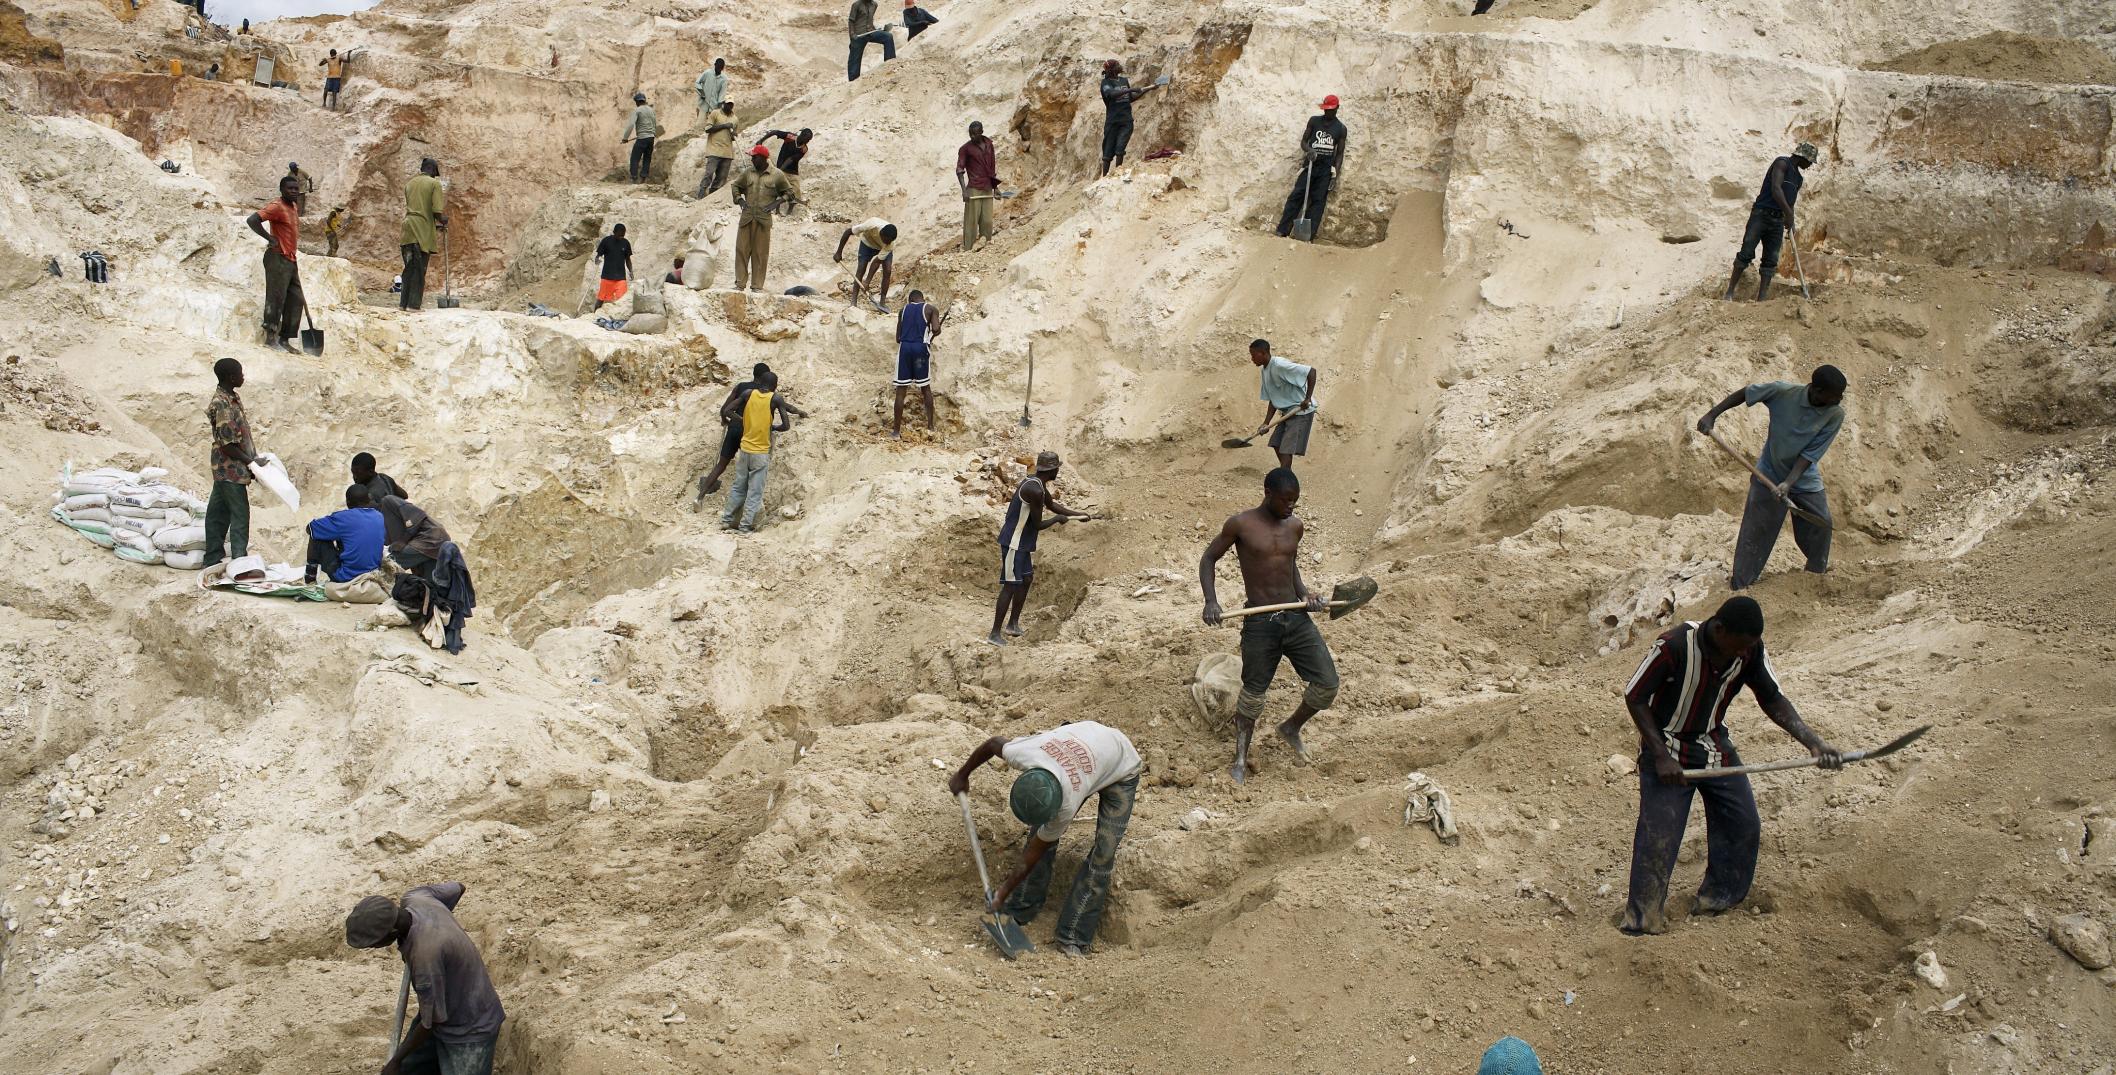 Artisanal miners in the DRC